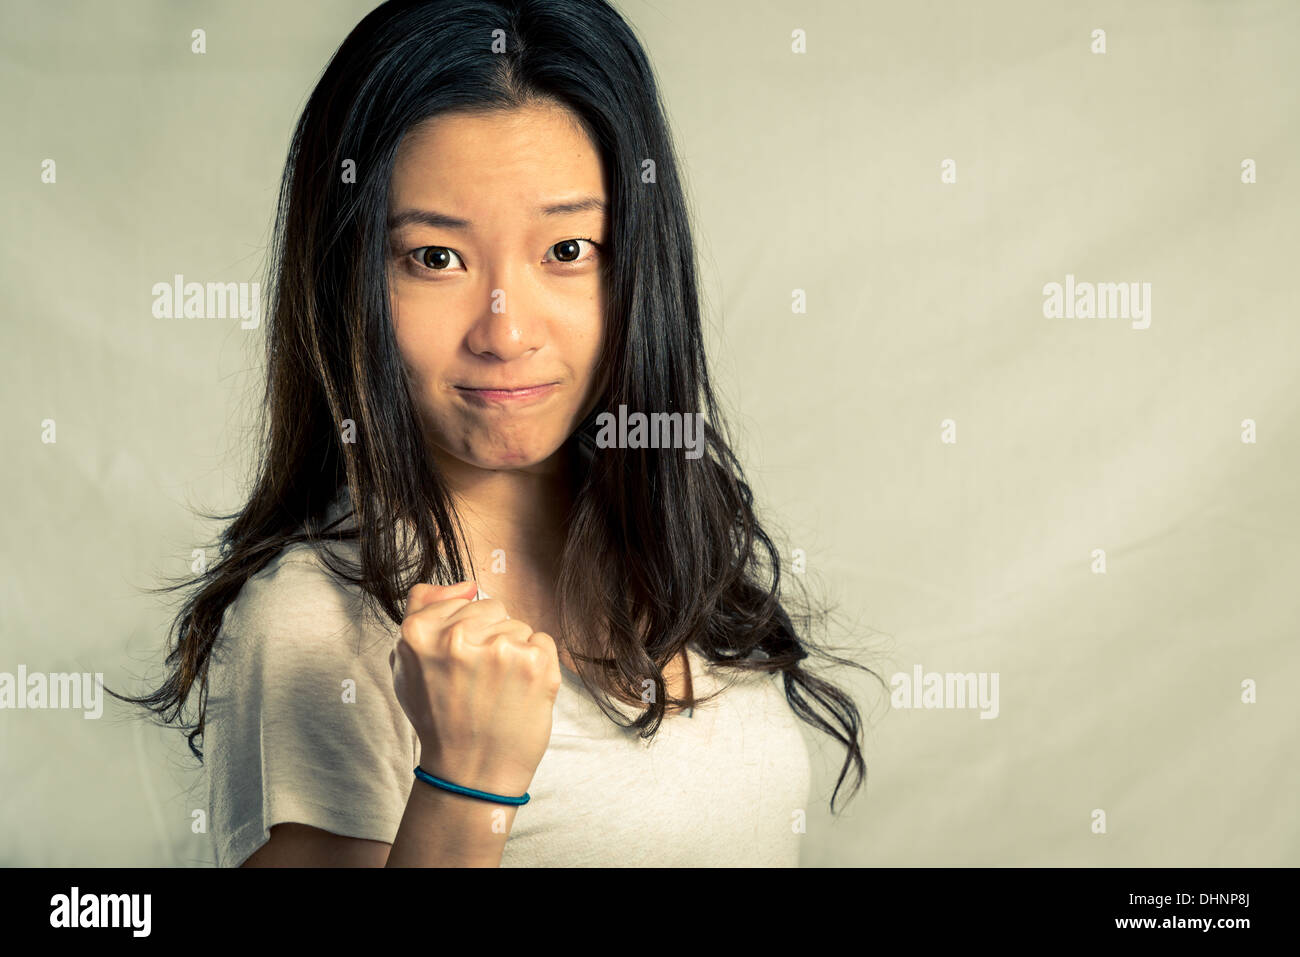 Young woman clenching her fist for encouragement, with fashion tone and background Stock Photo